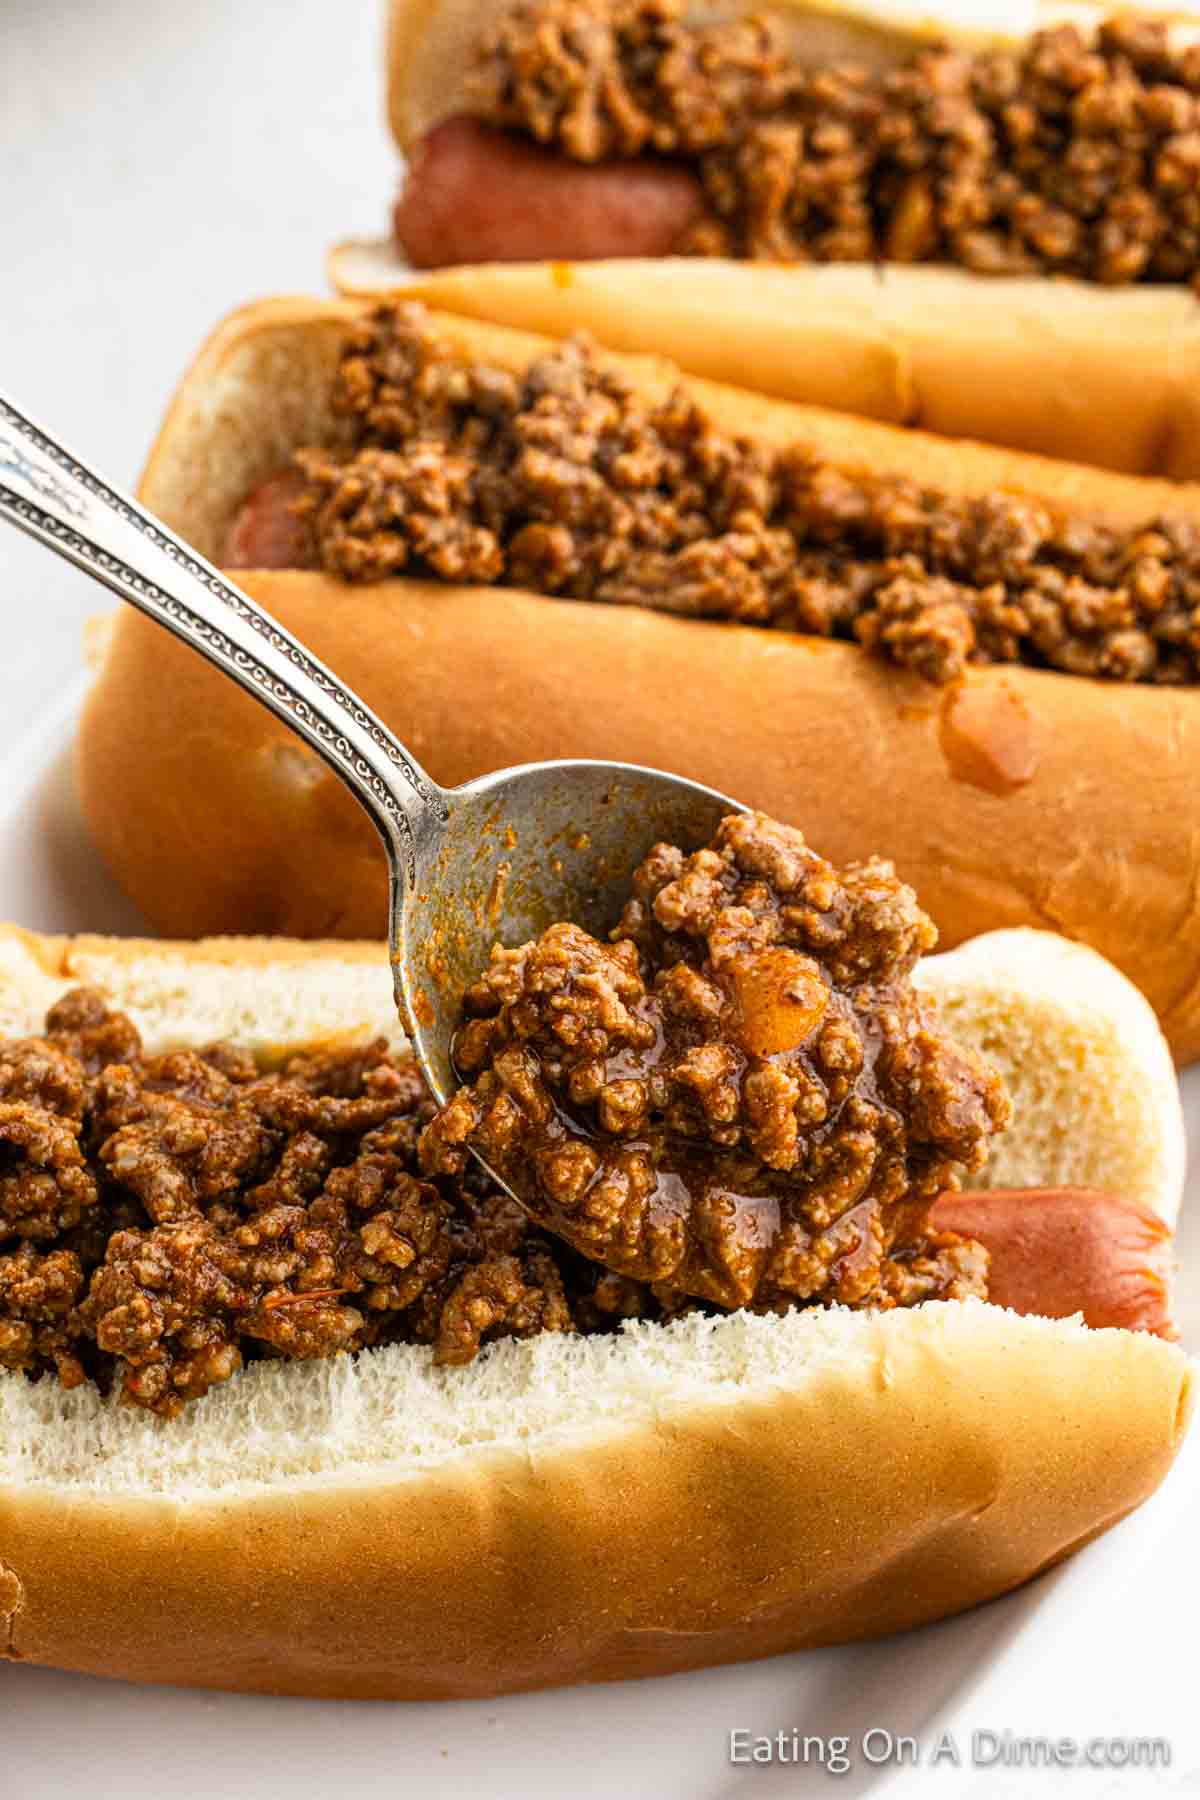 Hot dogs topped with chili 